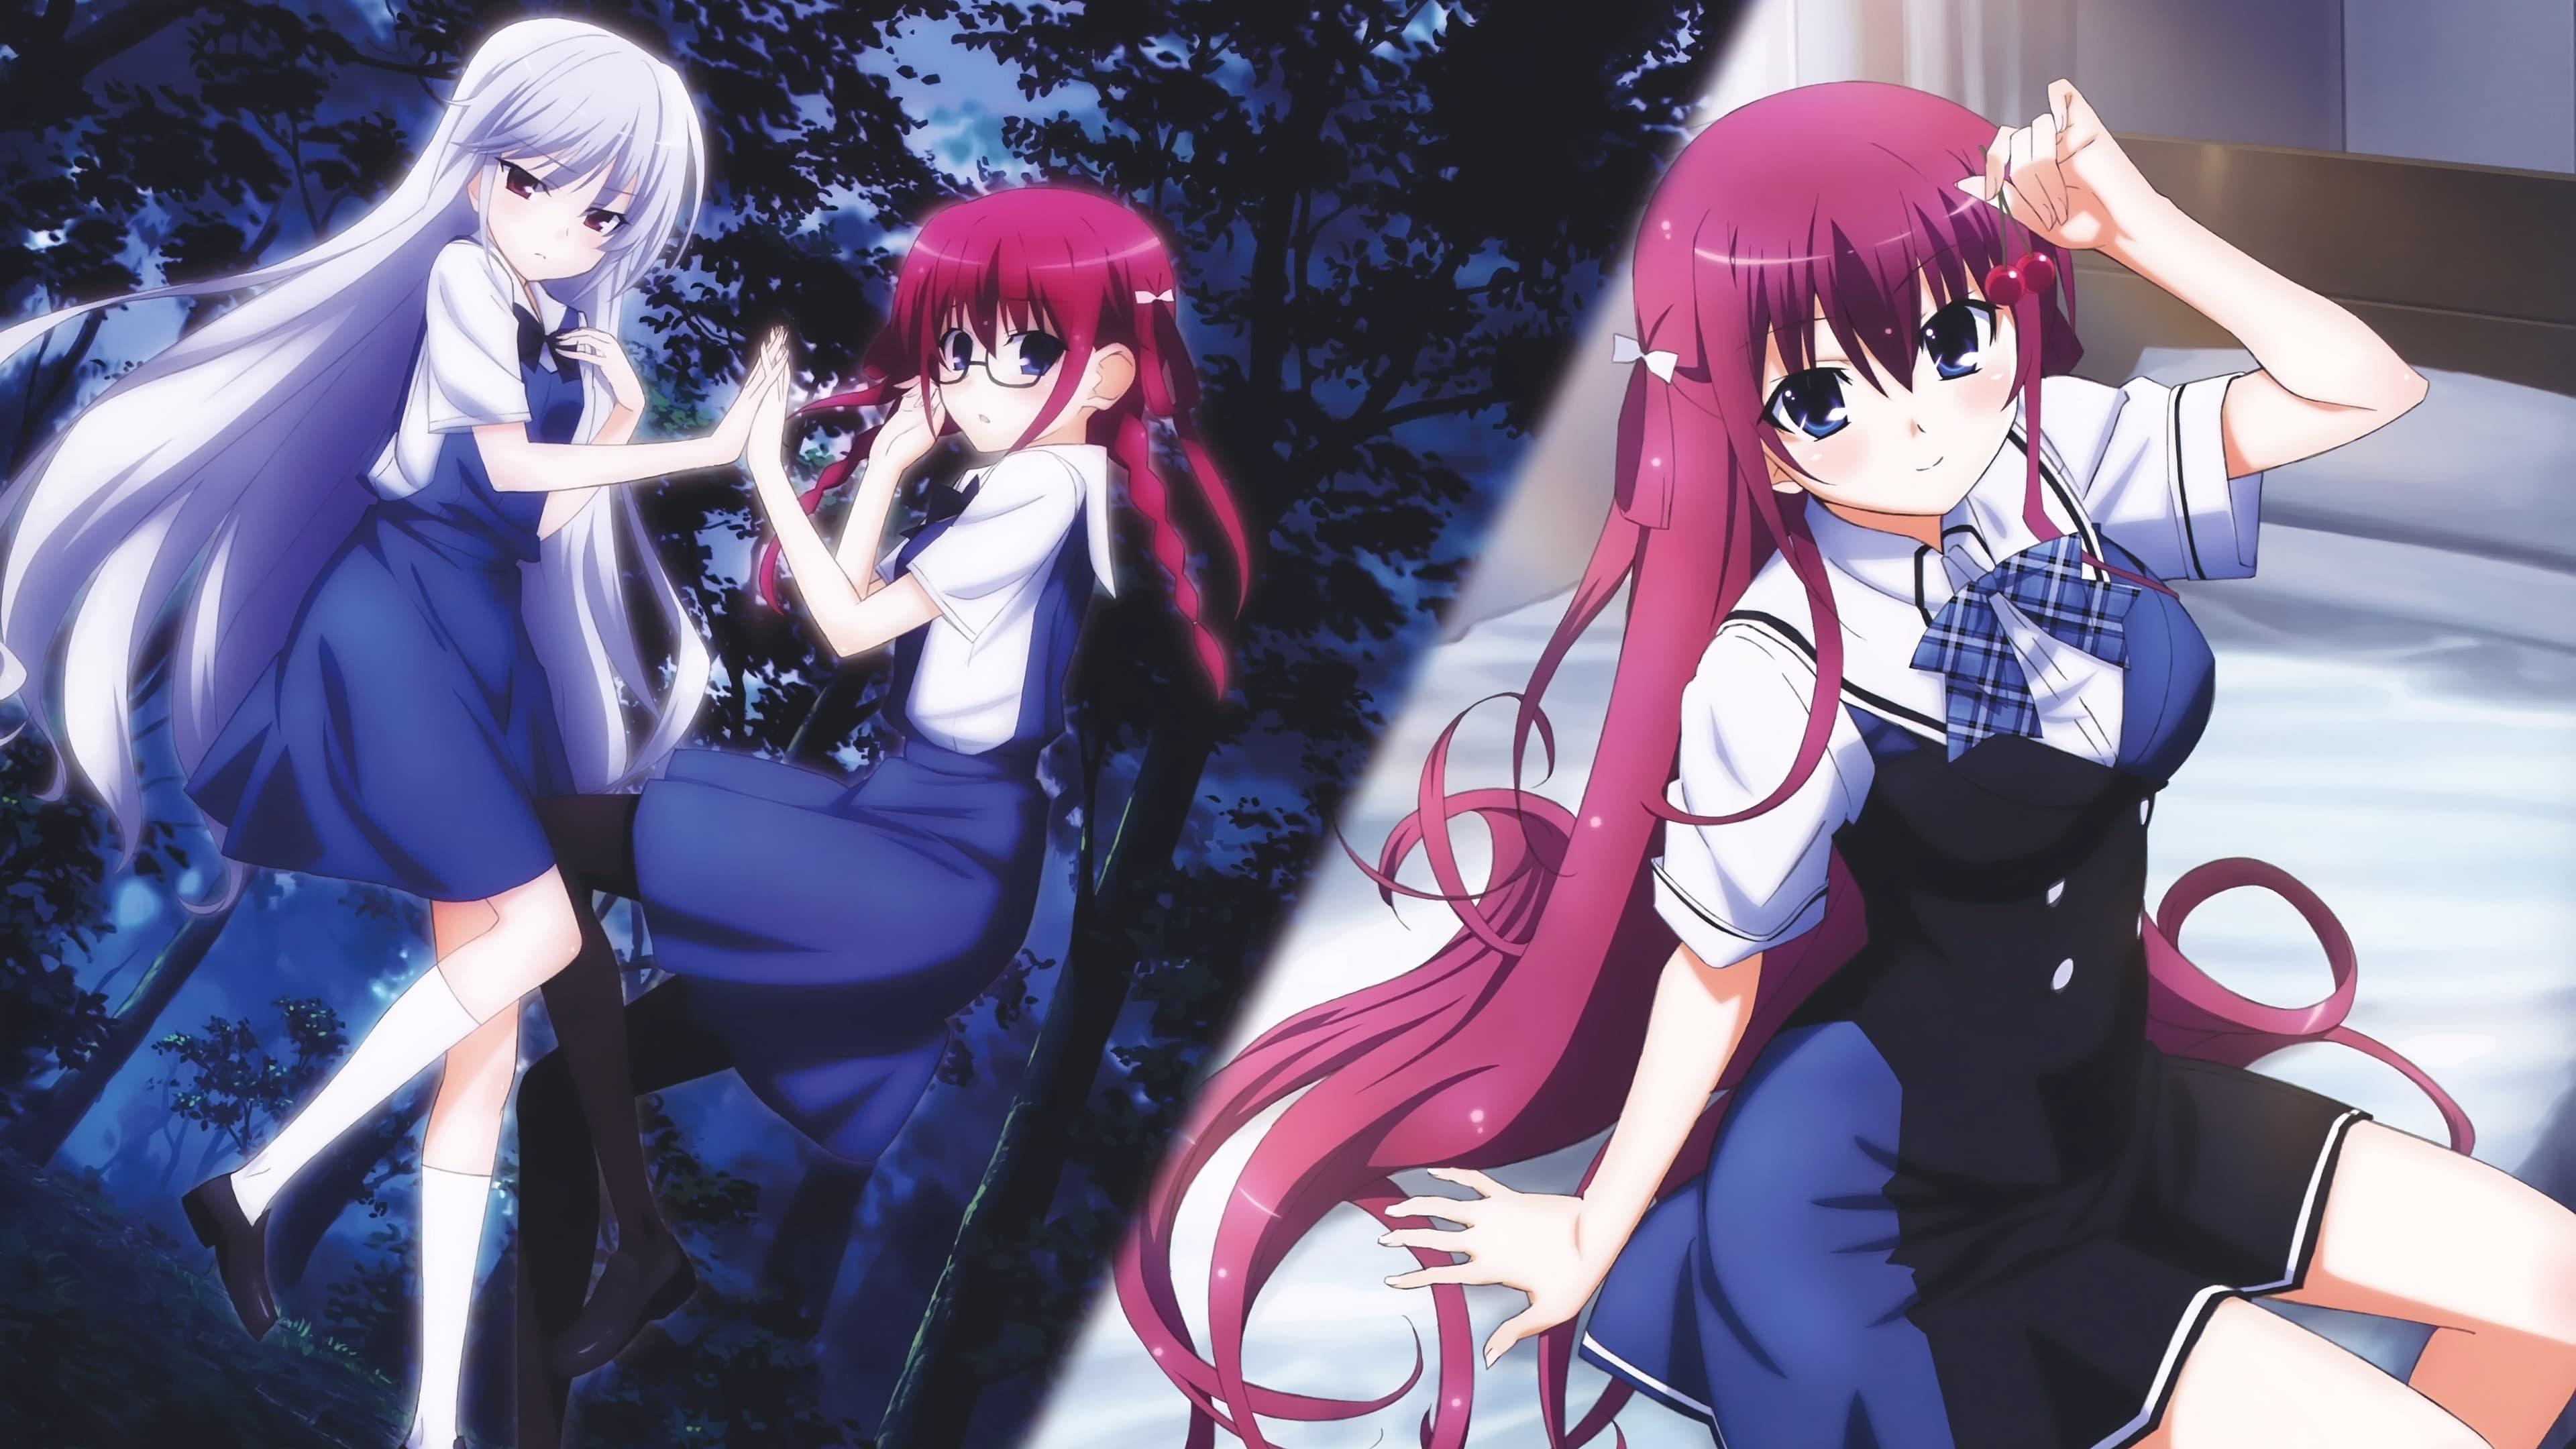 The Fruit of Grisaia backdrop